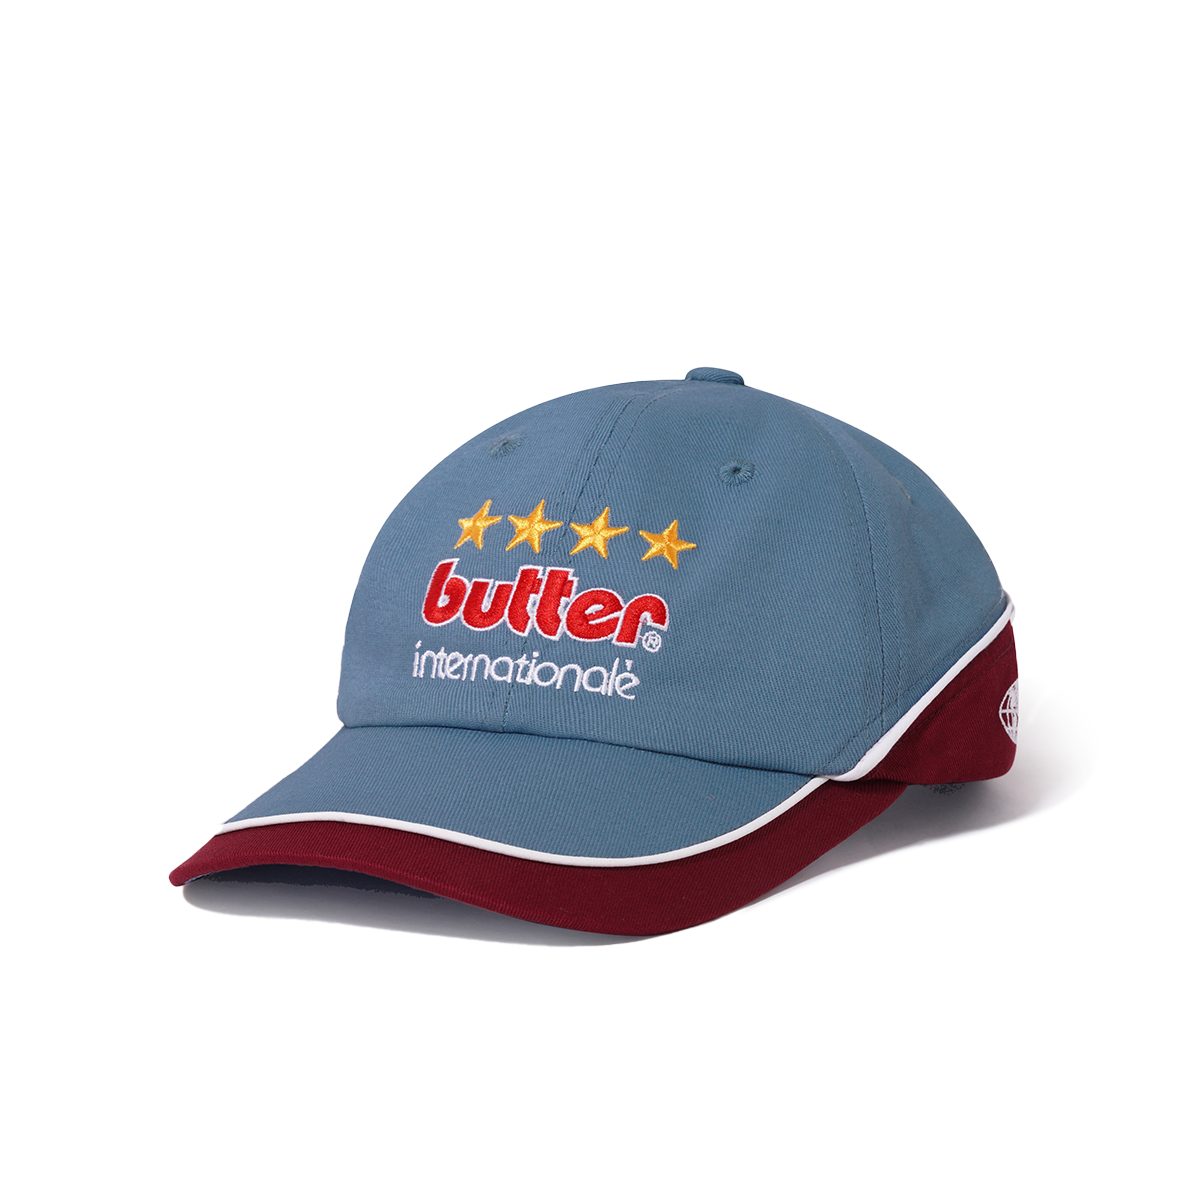 Butter Internationale 6 Panel Hat - Assorted Colors